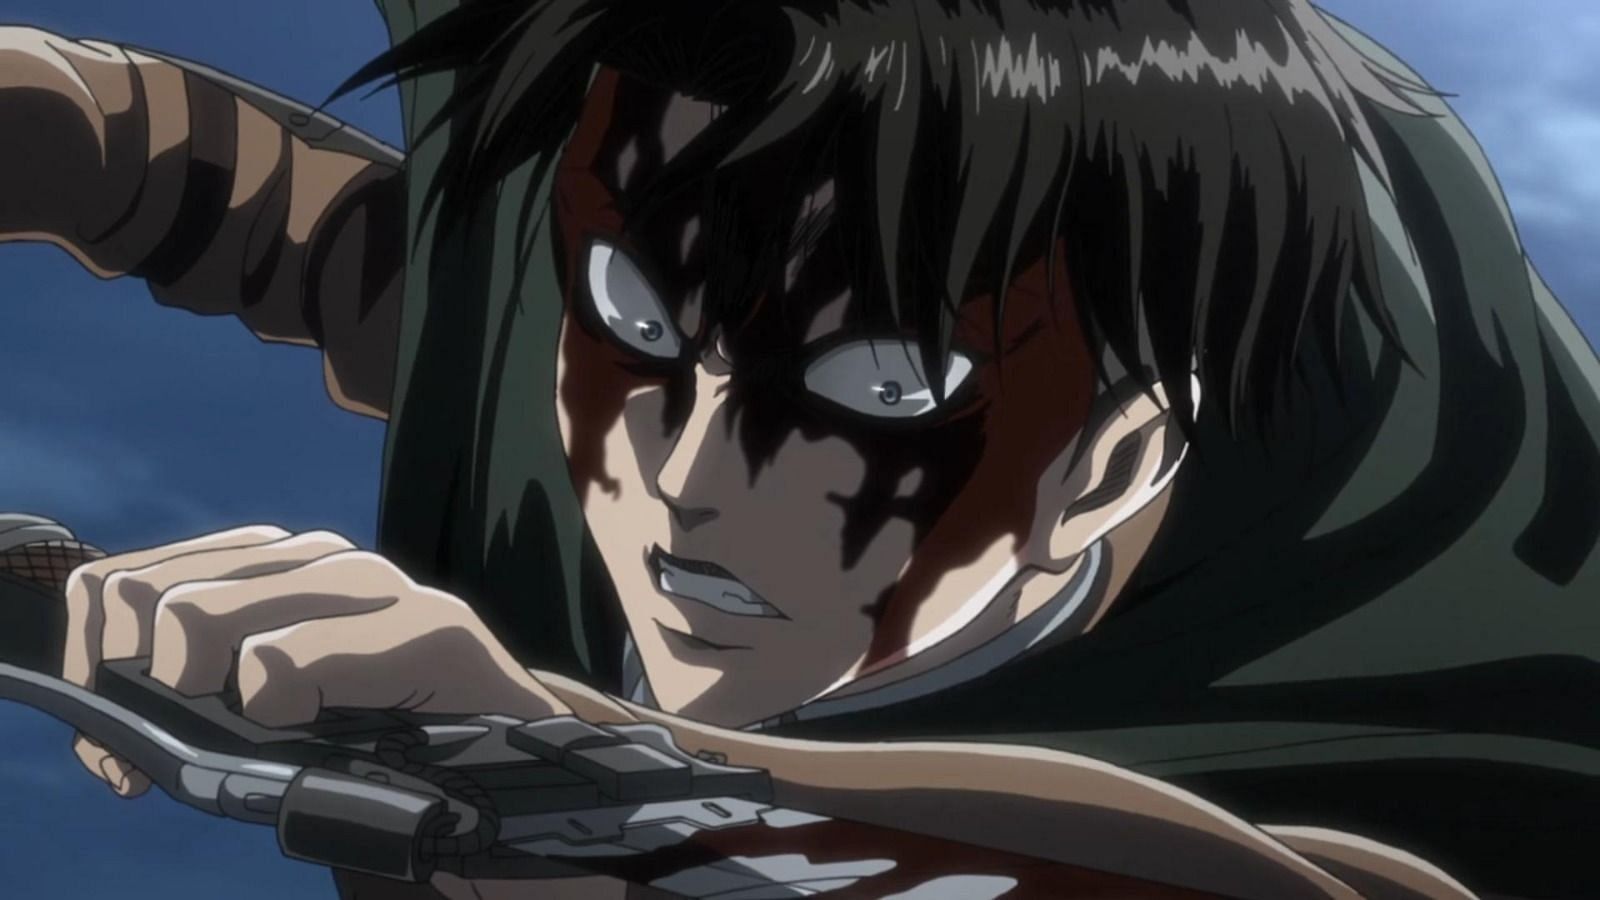 Captain Levi as seen in the anime. (Image via MAPPA)